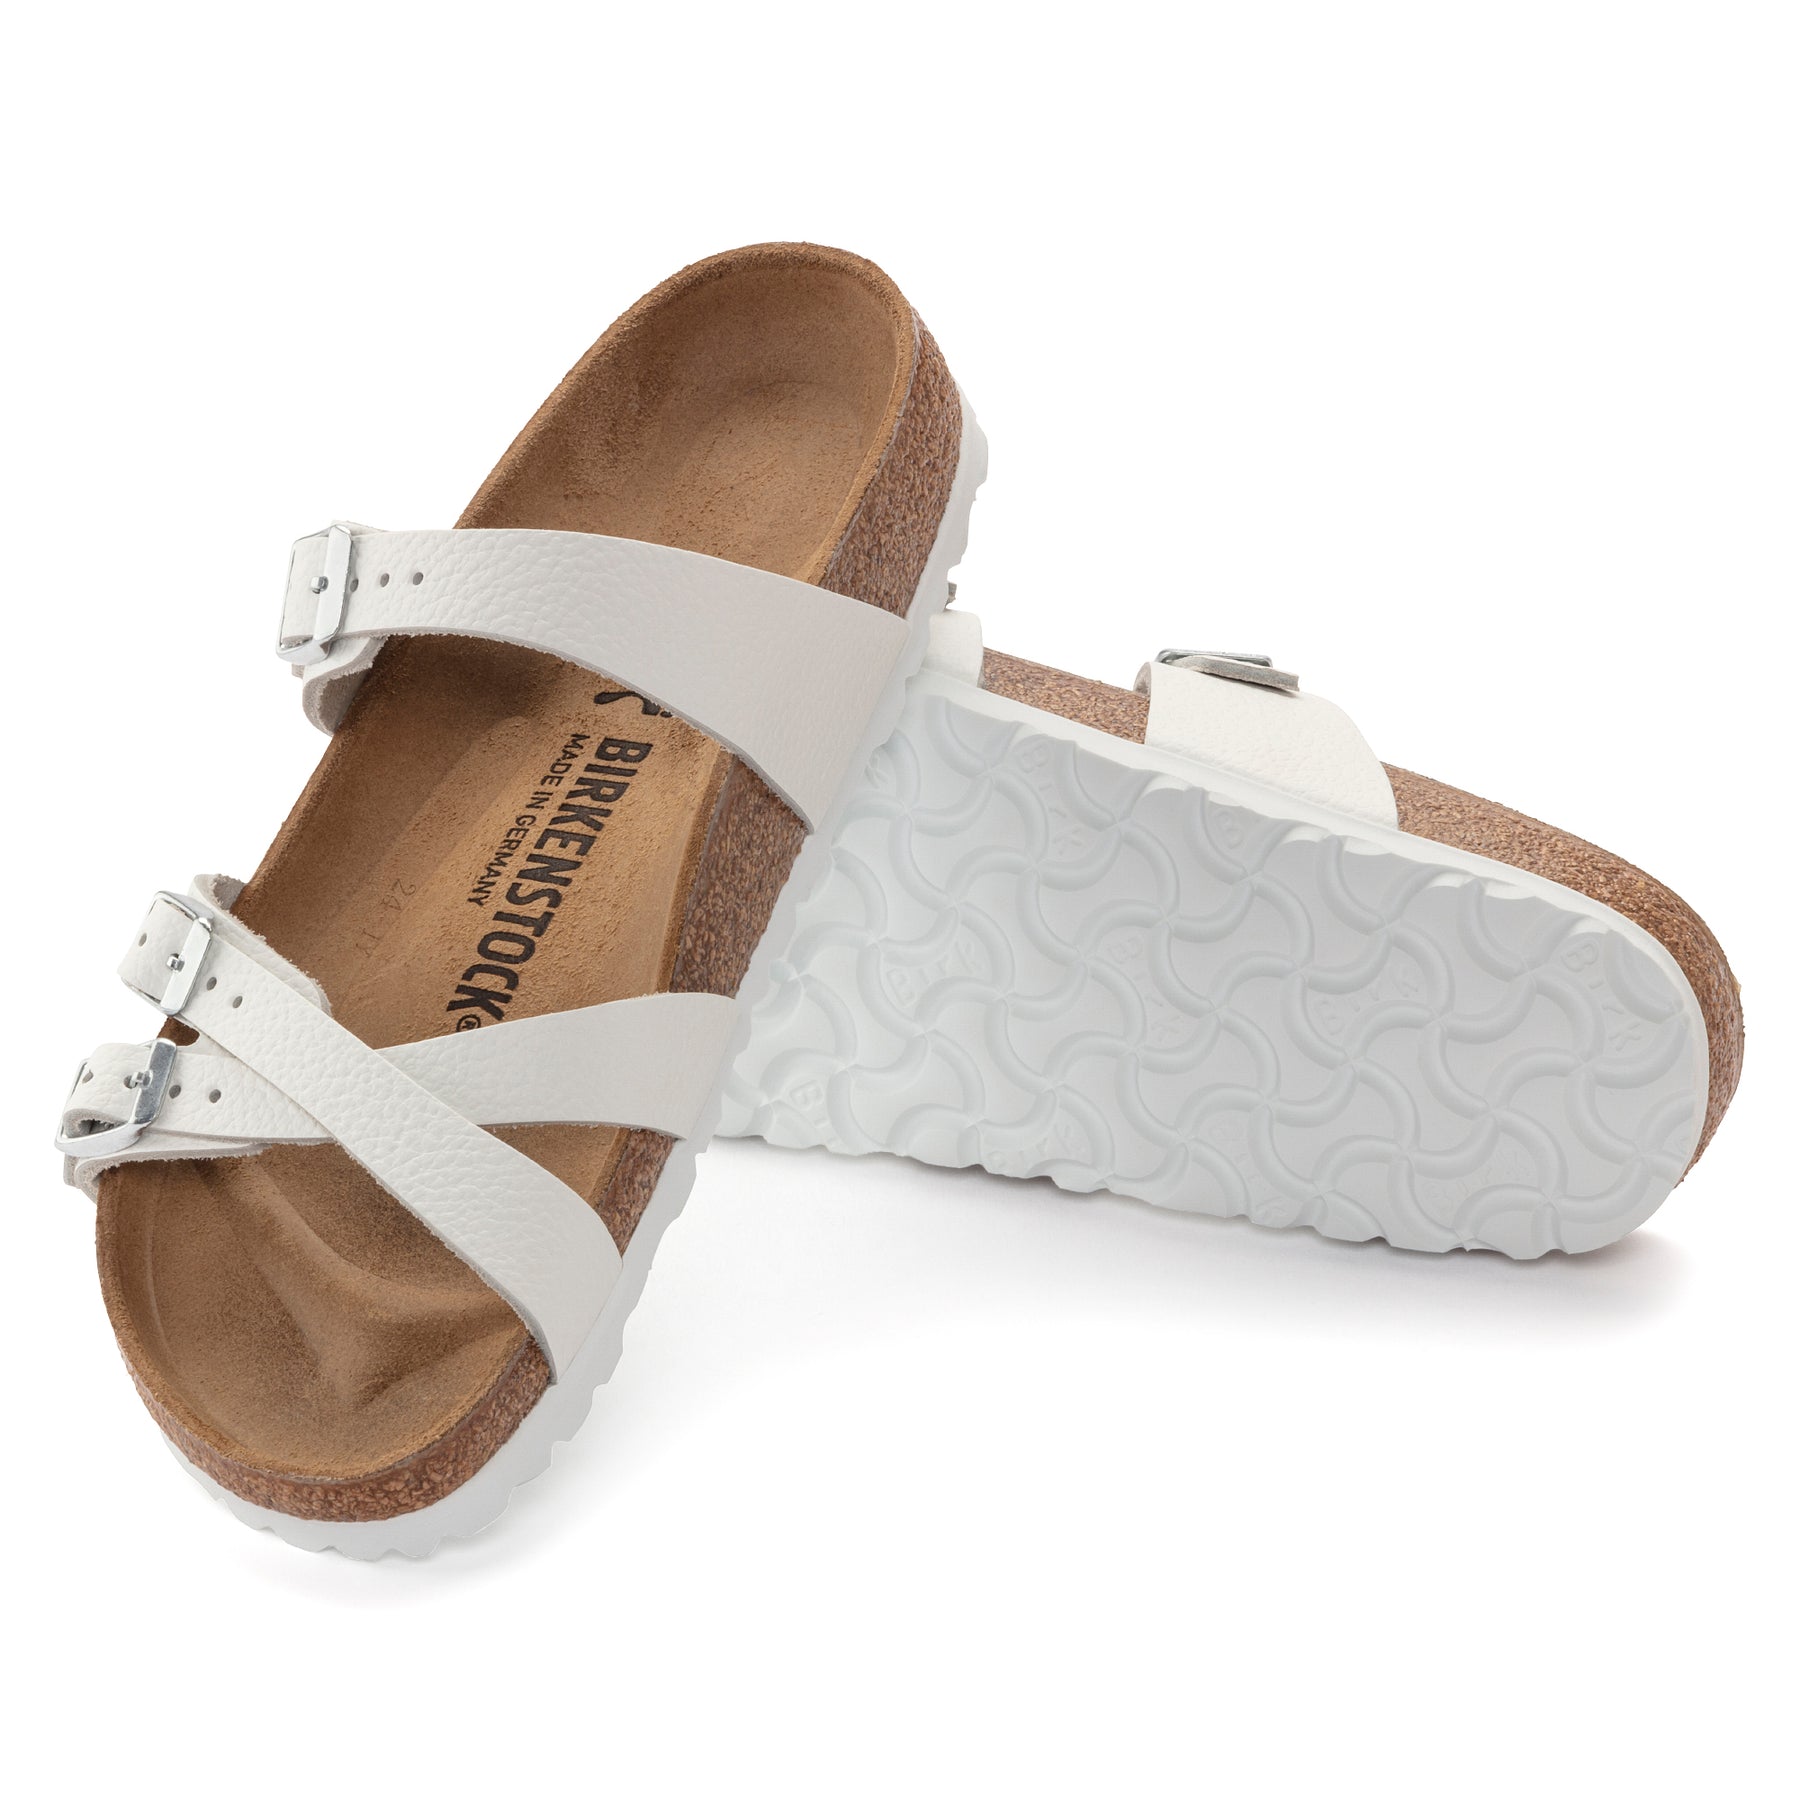 Birkenstock Limited Edition Franca white leather